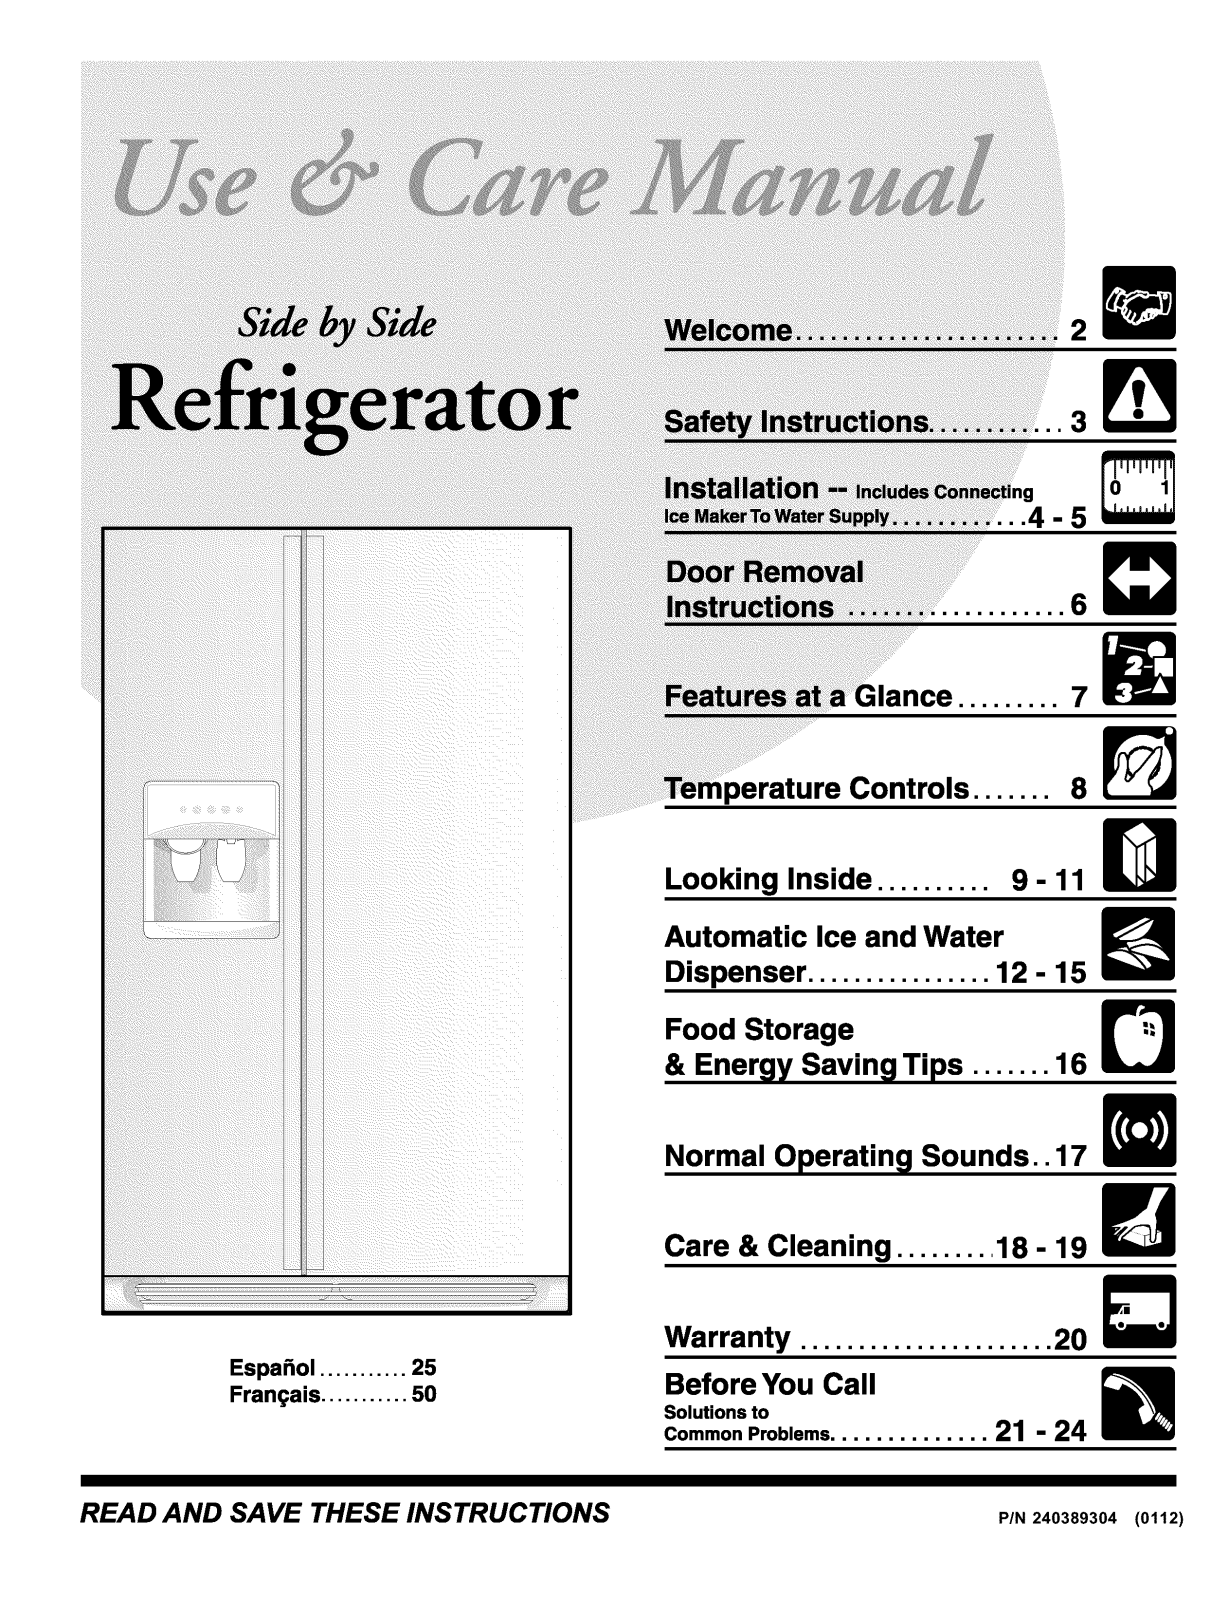 Frigidaire NGS26ZZAW4, NGS26ZZAW3, NGS26ZZAQ4, NGS26ZZAQ3, NGS26ZZAB4 Owner’s Manual